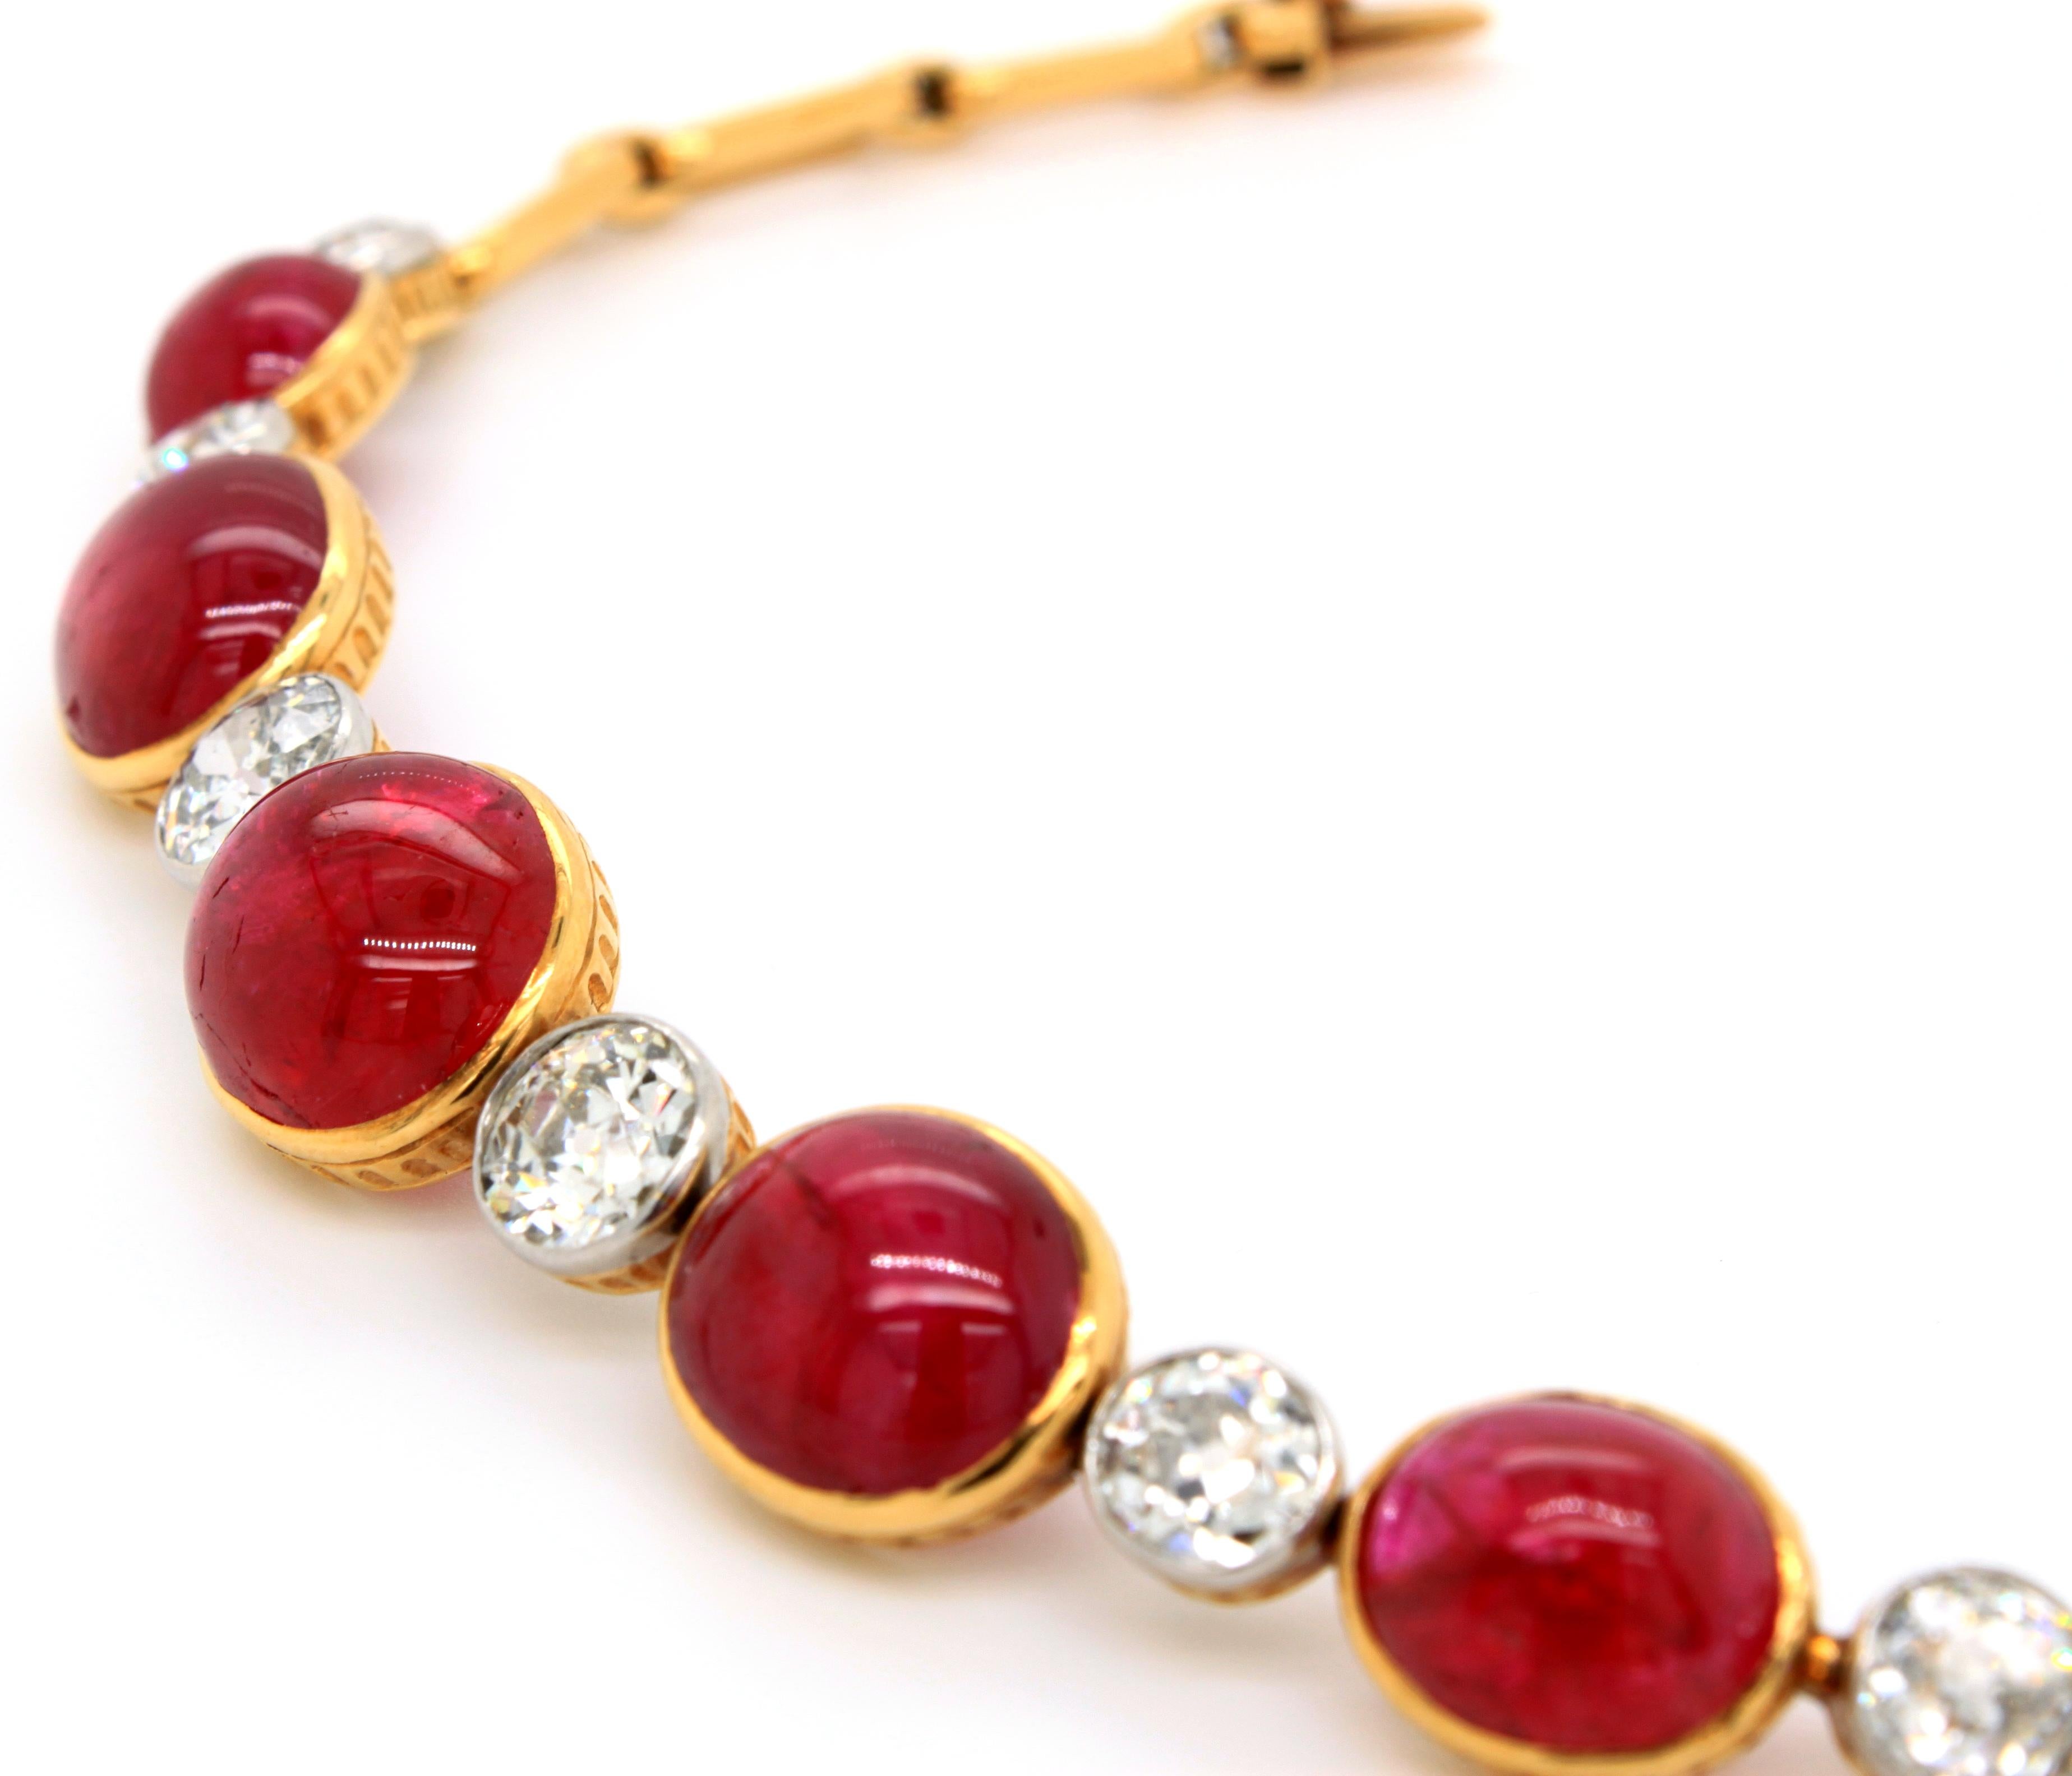 Burmese Ruby Cabochon and Old Cut Diamond Necklace/Bracelet, circa 1890s In Excellent Condition For Sale In Idar-Oberstein, DE